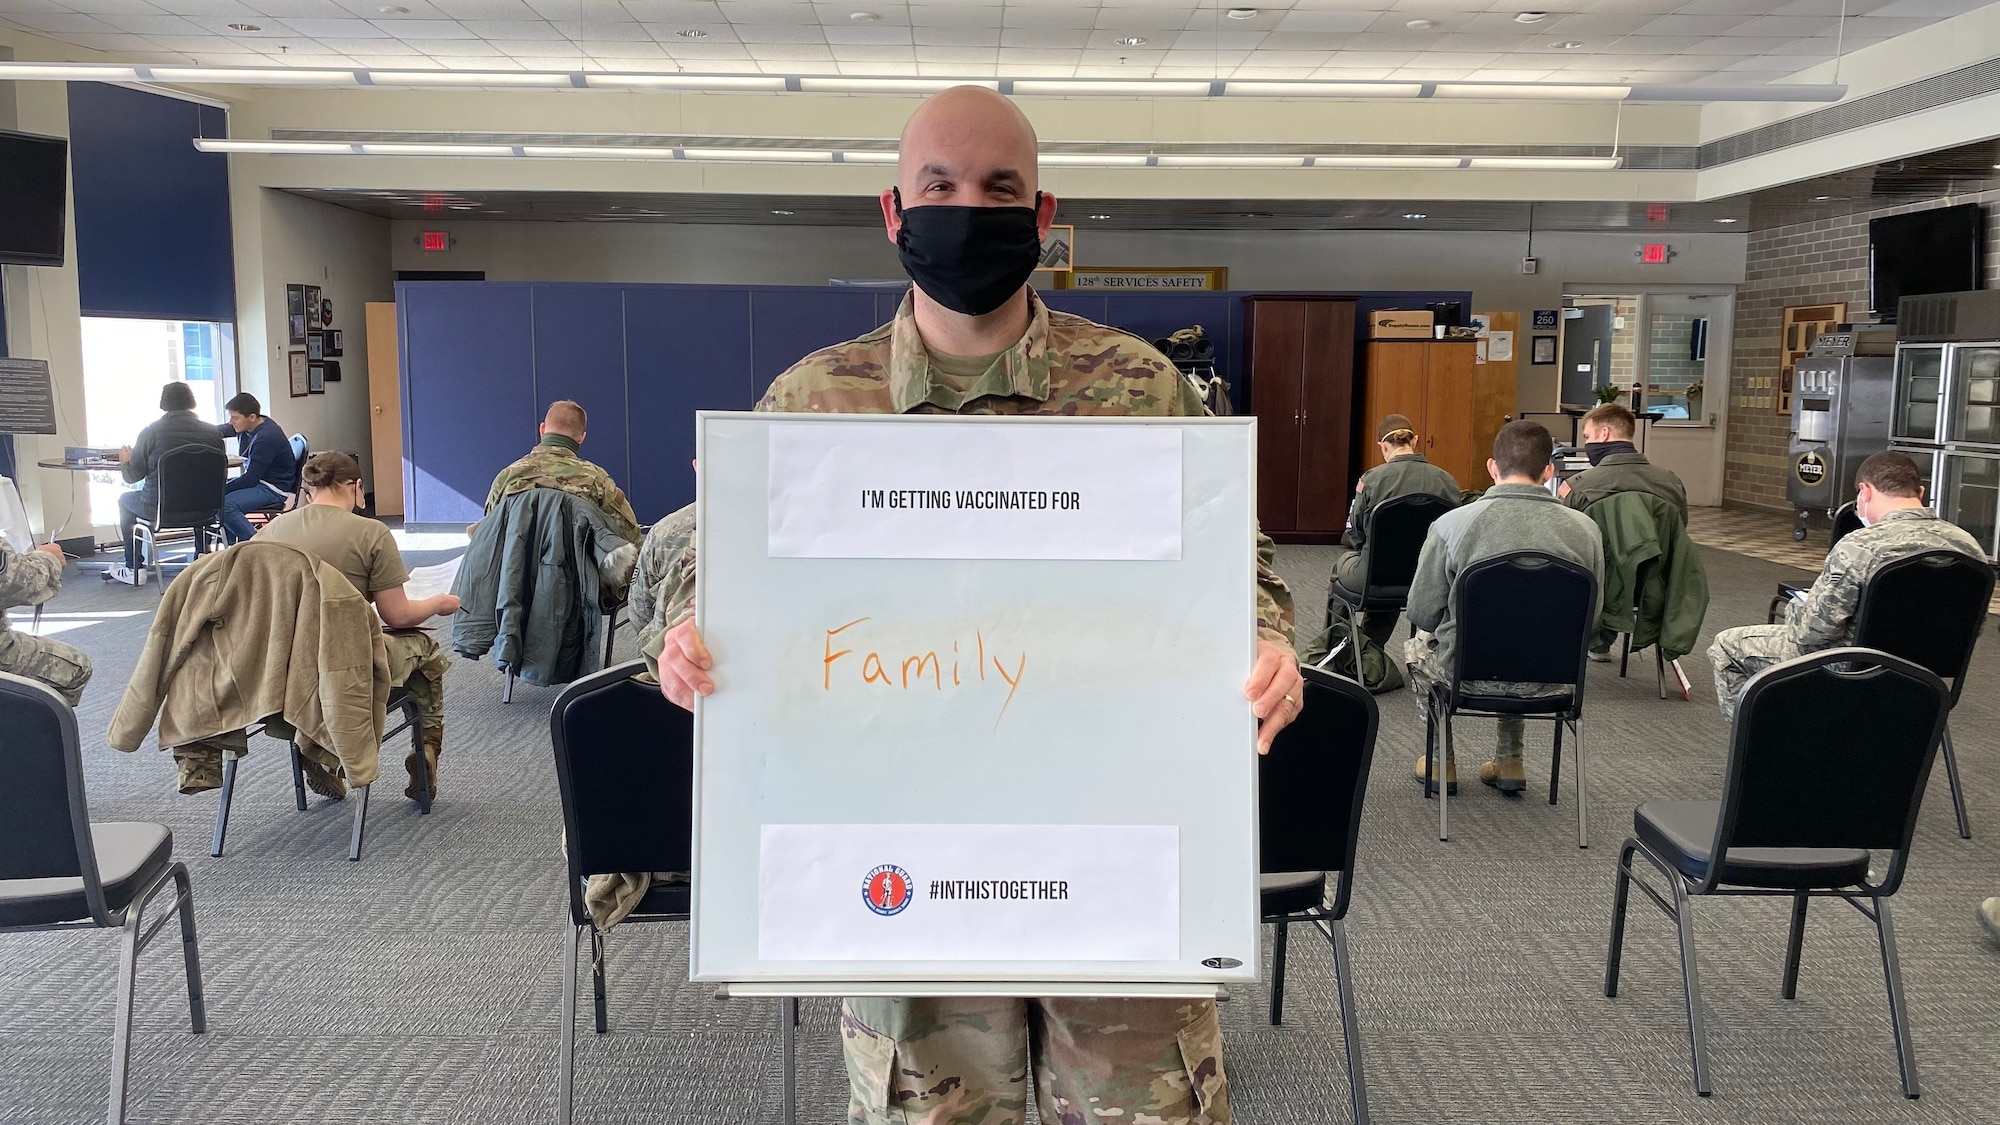 A member of the 128th Air Refueling Wing holds up a sign signifying why they are choosing to receive the COVID-19 Vaccine here at 128th Air Refueling Wing, Milwaukee, Feb. 7, 2020. The 128th Air Refueling Wing has begun the distribution of the COVID-19 vaccine in coordination with the U.S. Department of Defense's Operation Warp Speed. (U.S. Air National Guard photo by Master Sgt. Kellen Kroening)